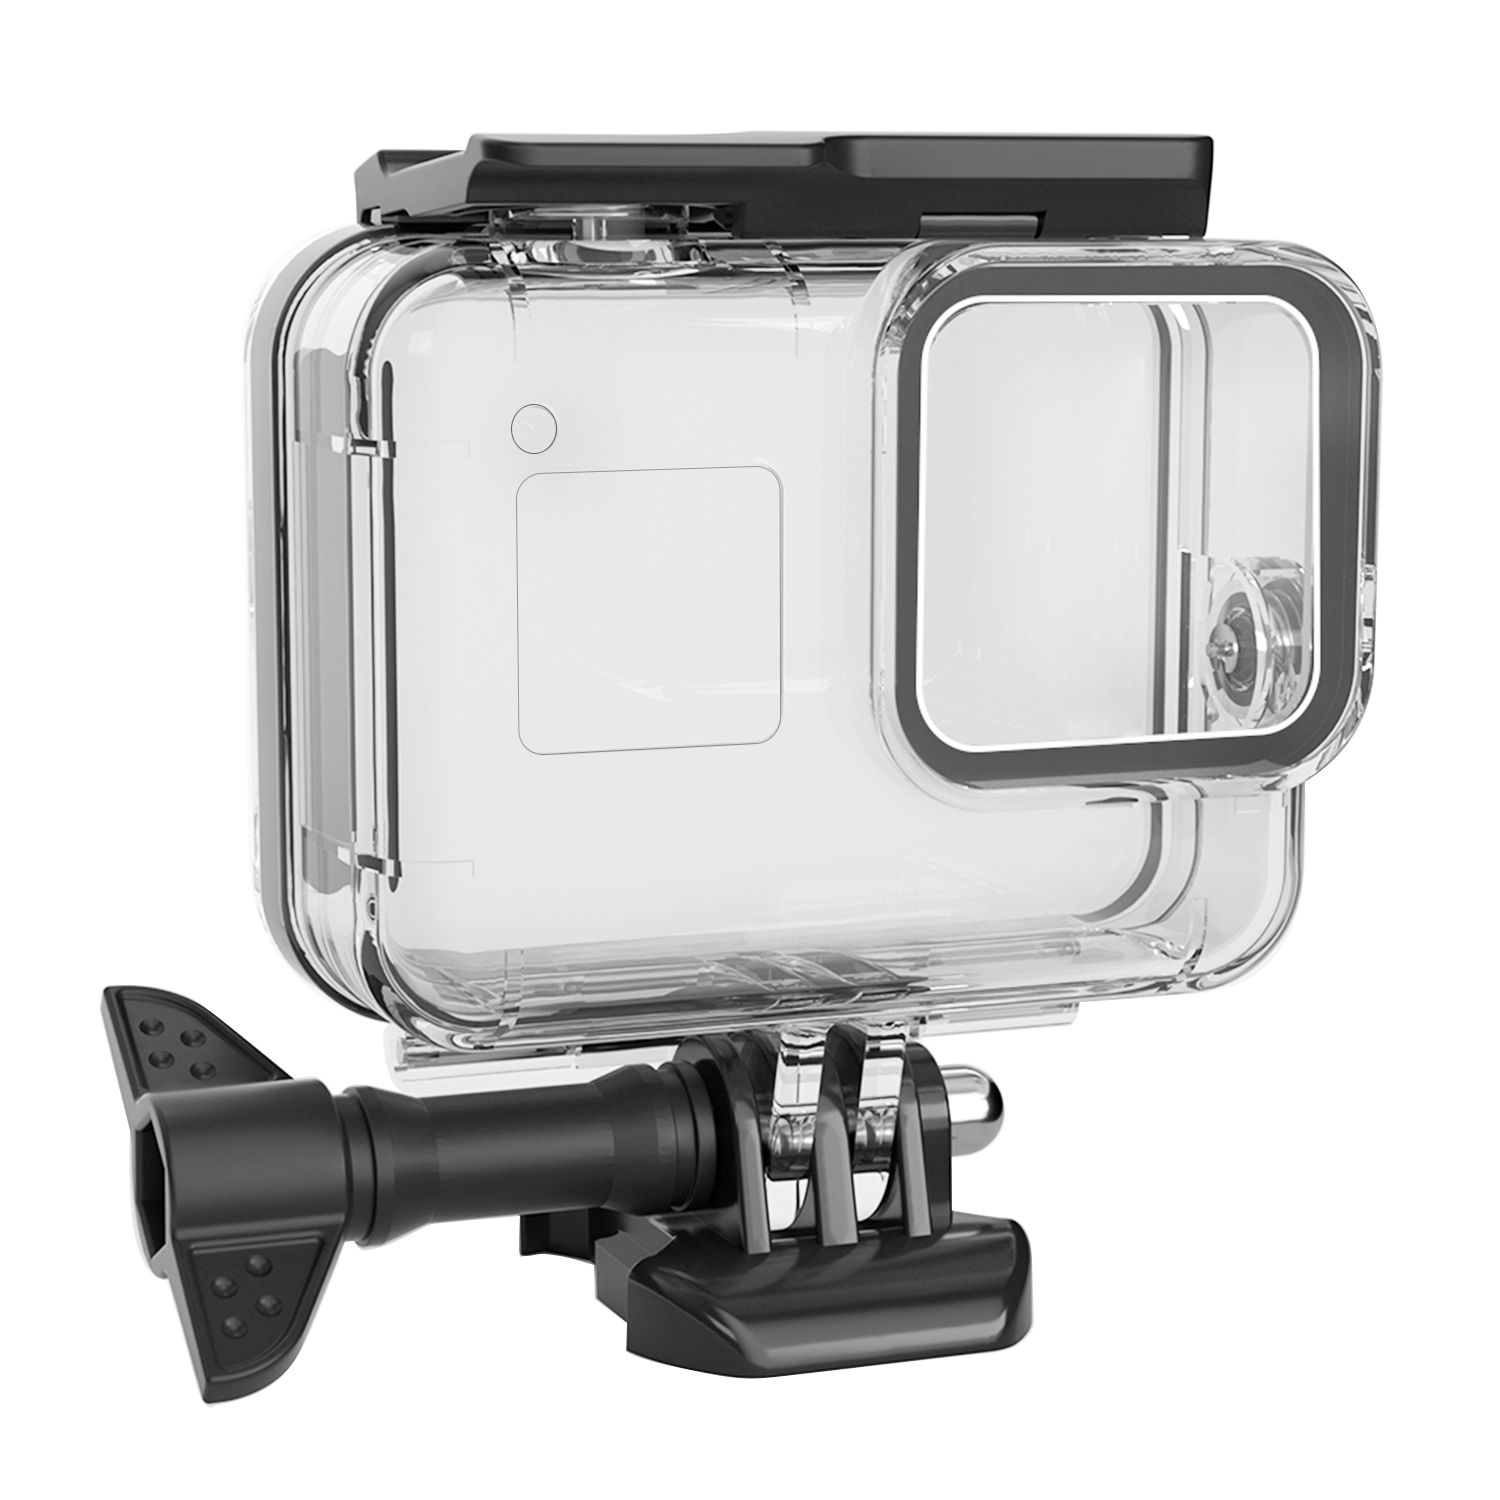 Sheingka-60m-Waterproof-Housing-Shell-Protective-Cover-for-GoPro-HERO-8-Black-Hard-Protective-Case-S-1677266